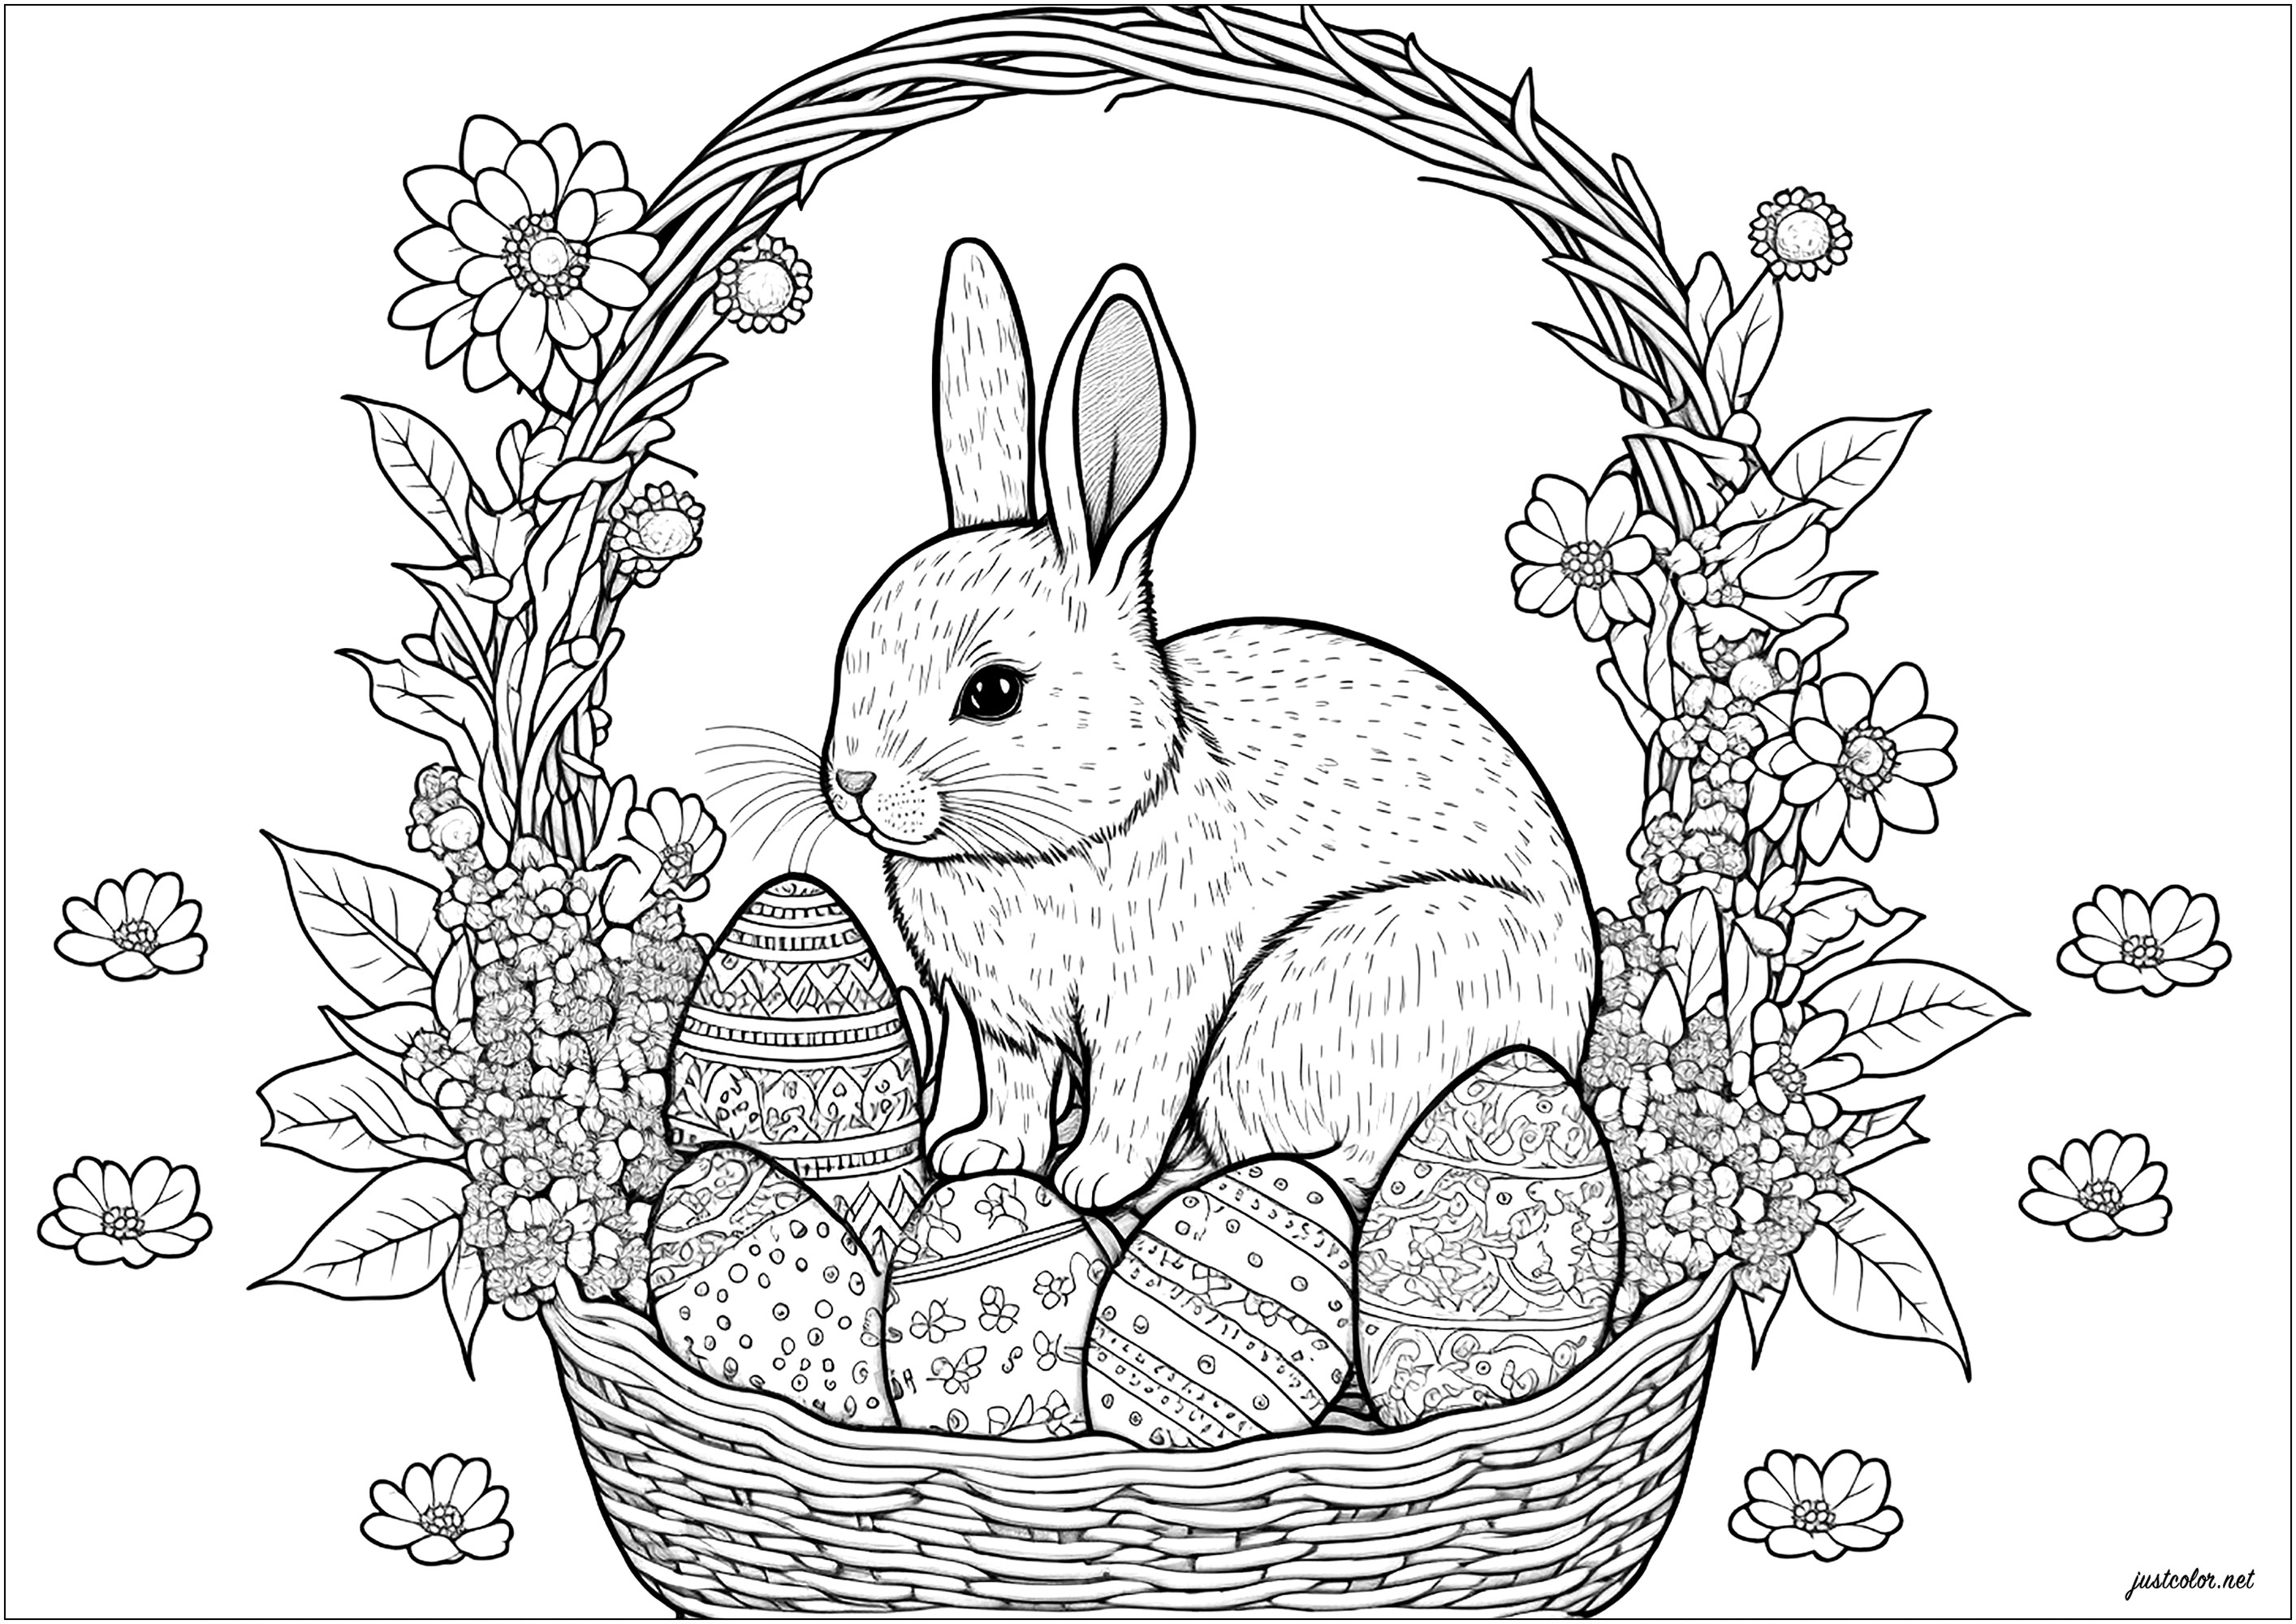 Pretty coloring of a basket of Easter eggs with a rabbit inside